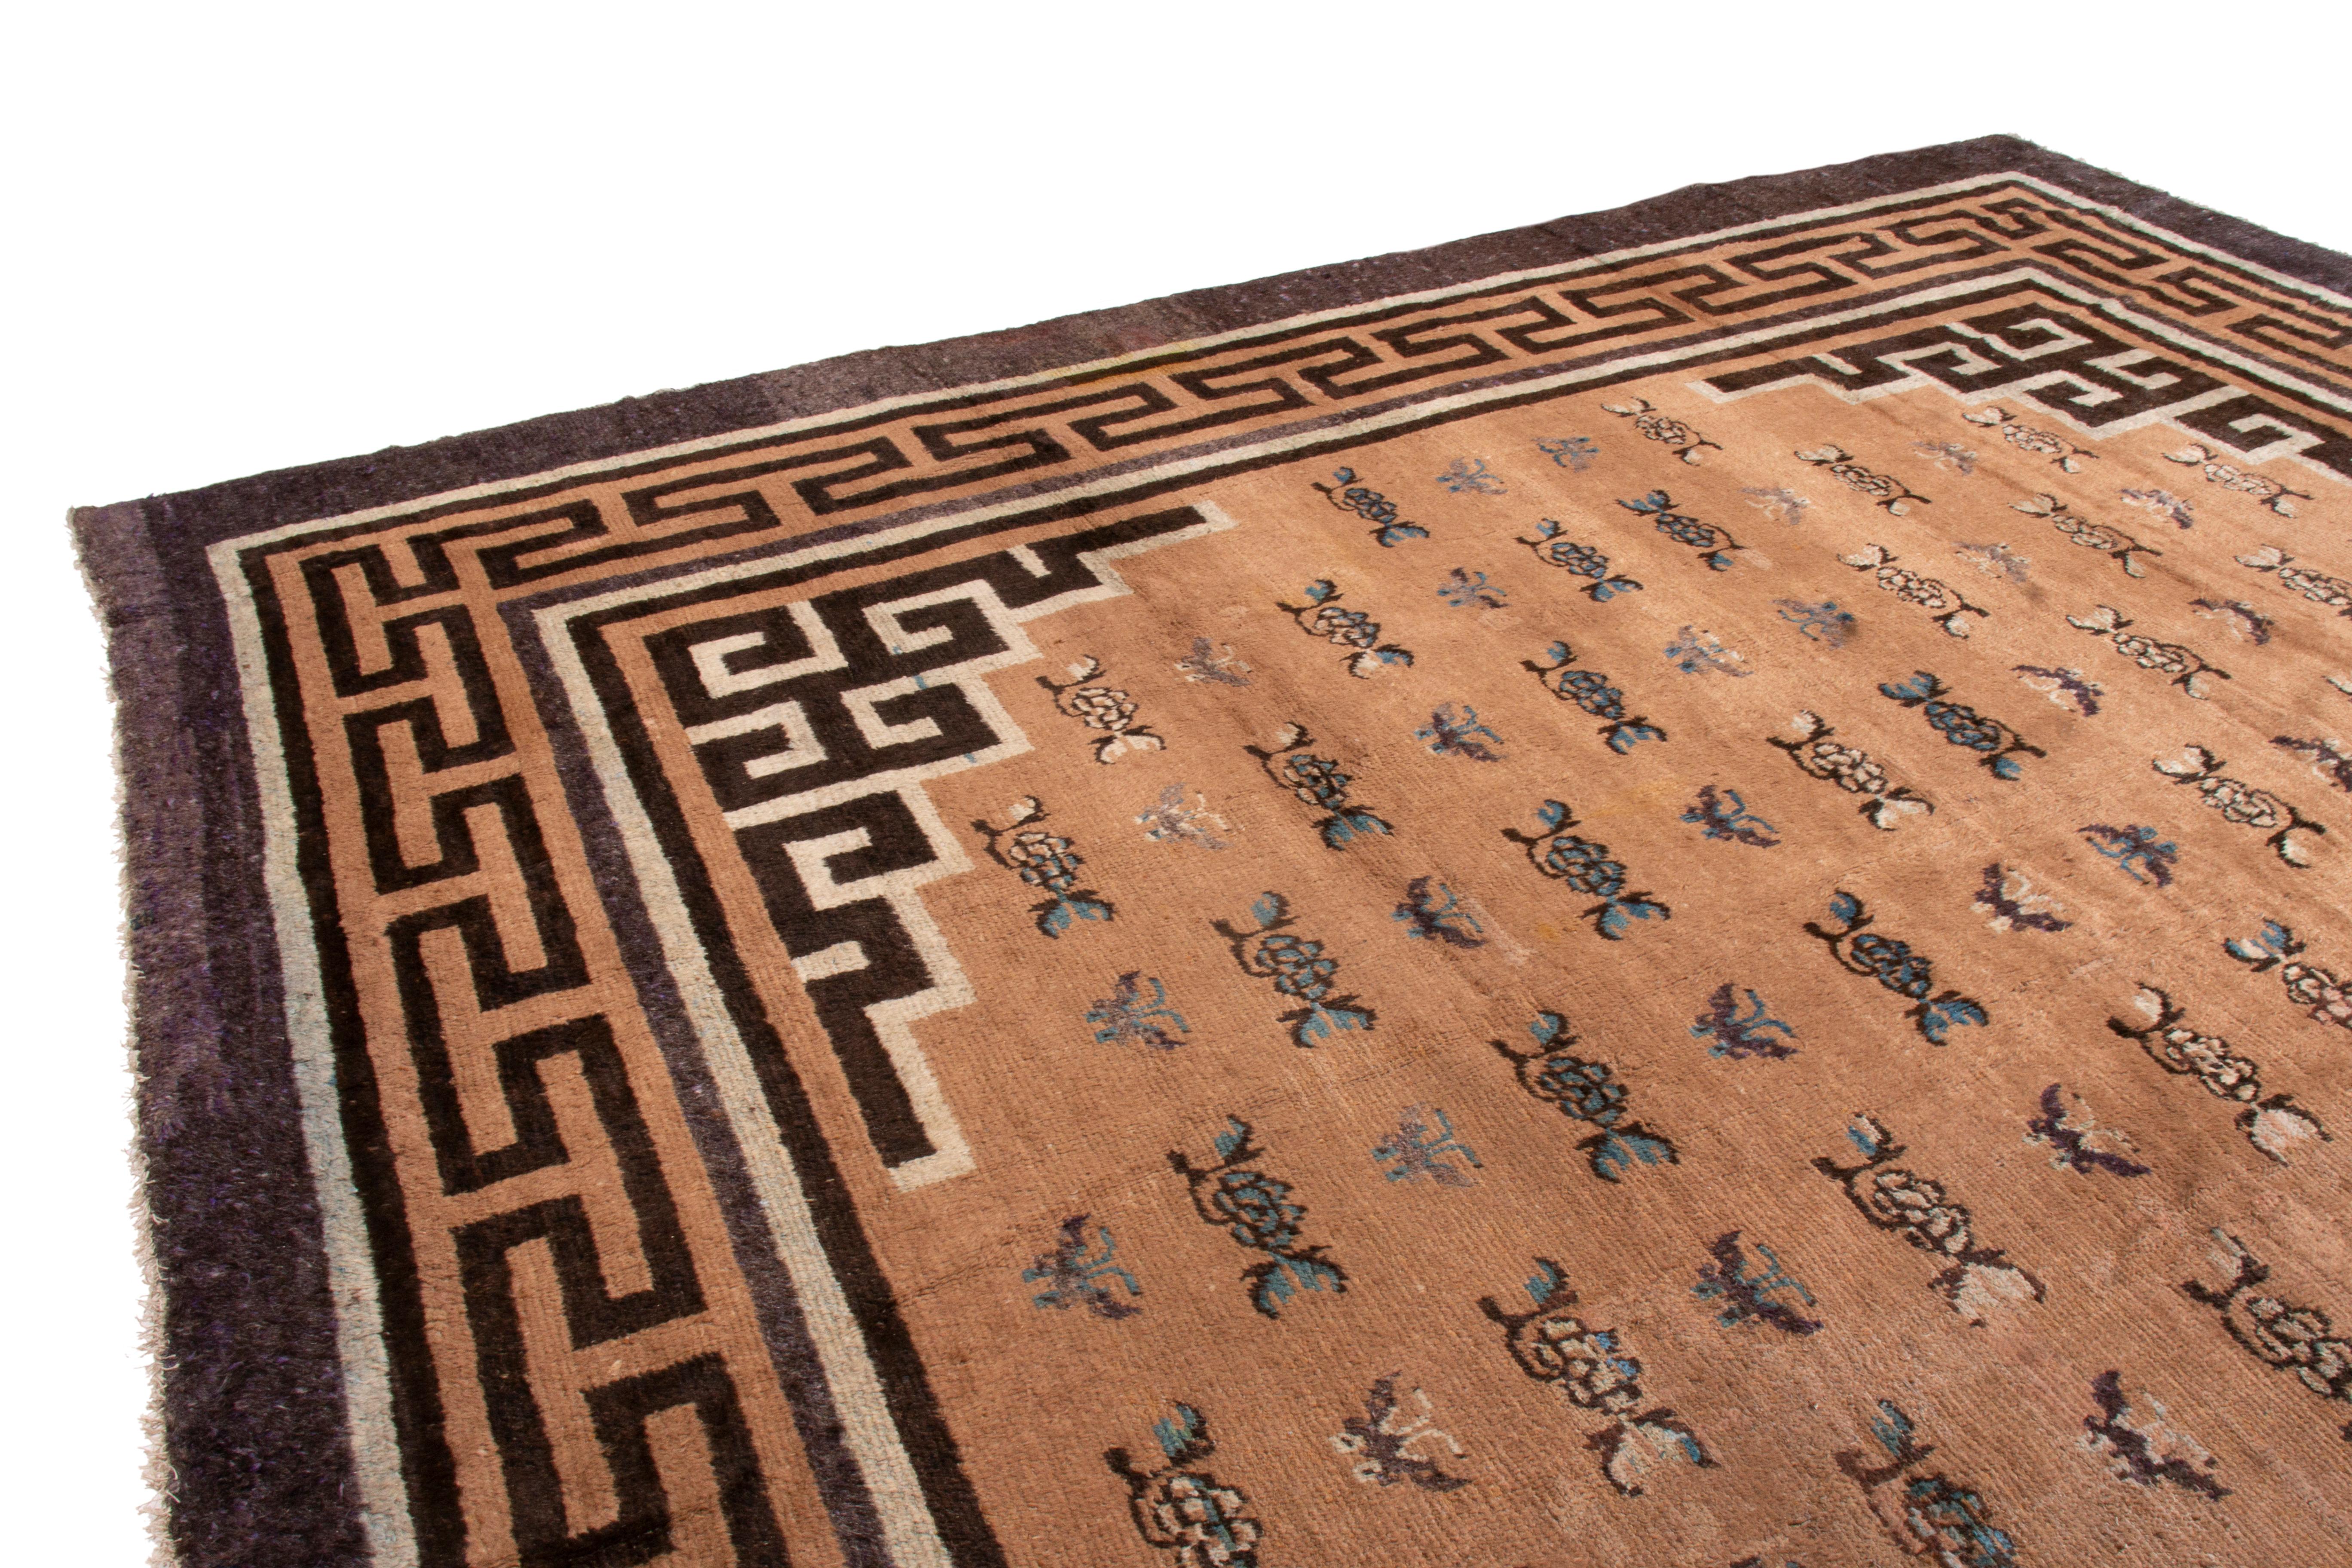 This antique transitional Mongolian wool rug has an all-over floral design with unique Chinese inspiration. From 1860-1870, the inner border features black right-angle characters-archaic Chinese symbols commonly seen in other oriental and Turkish